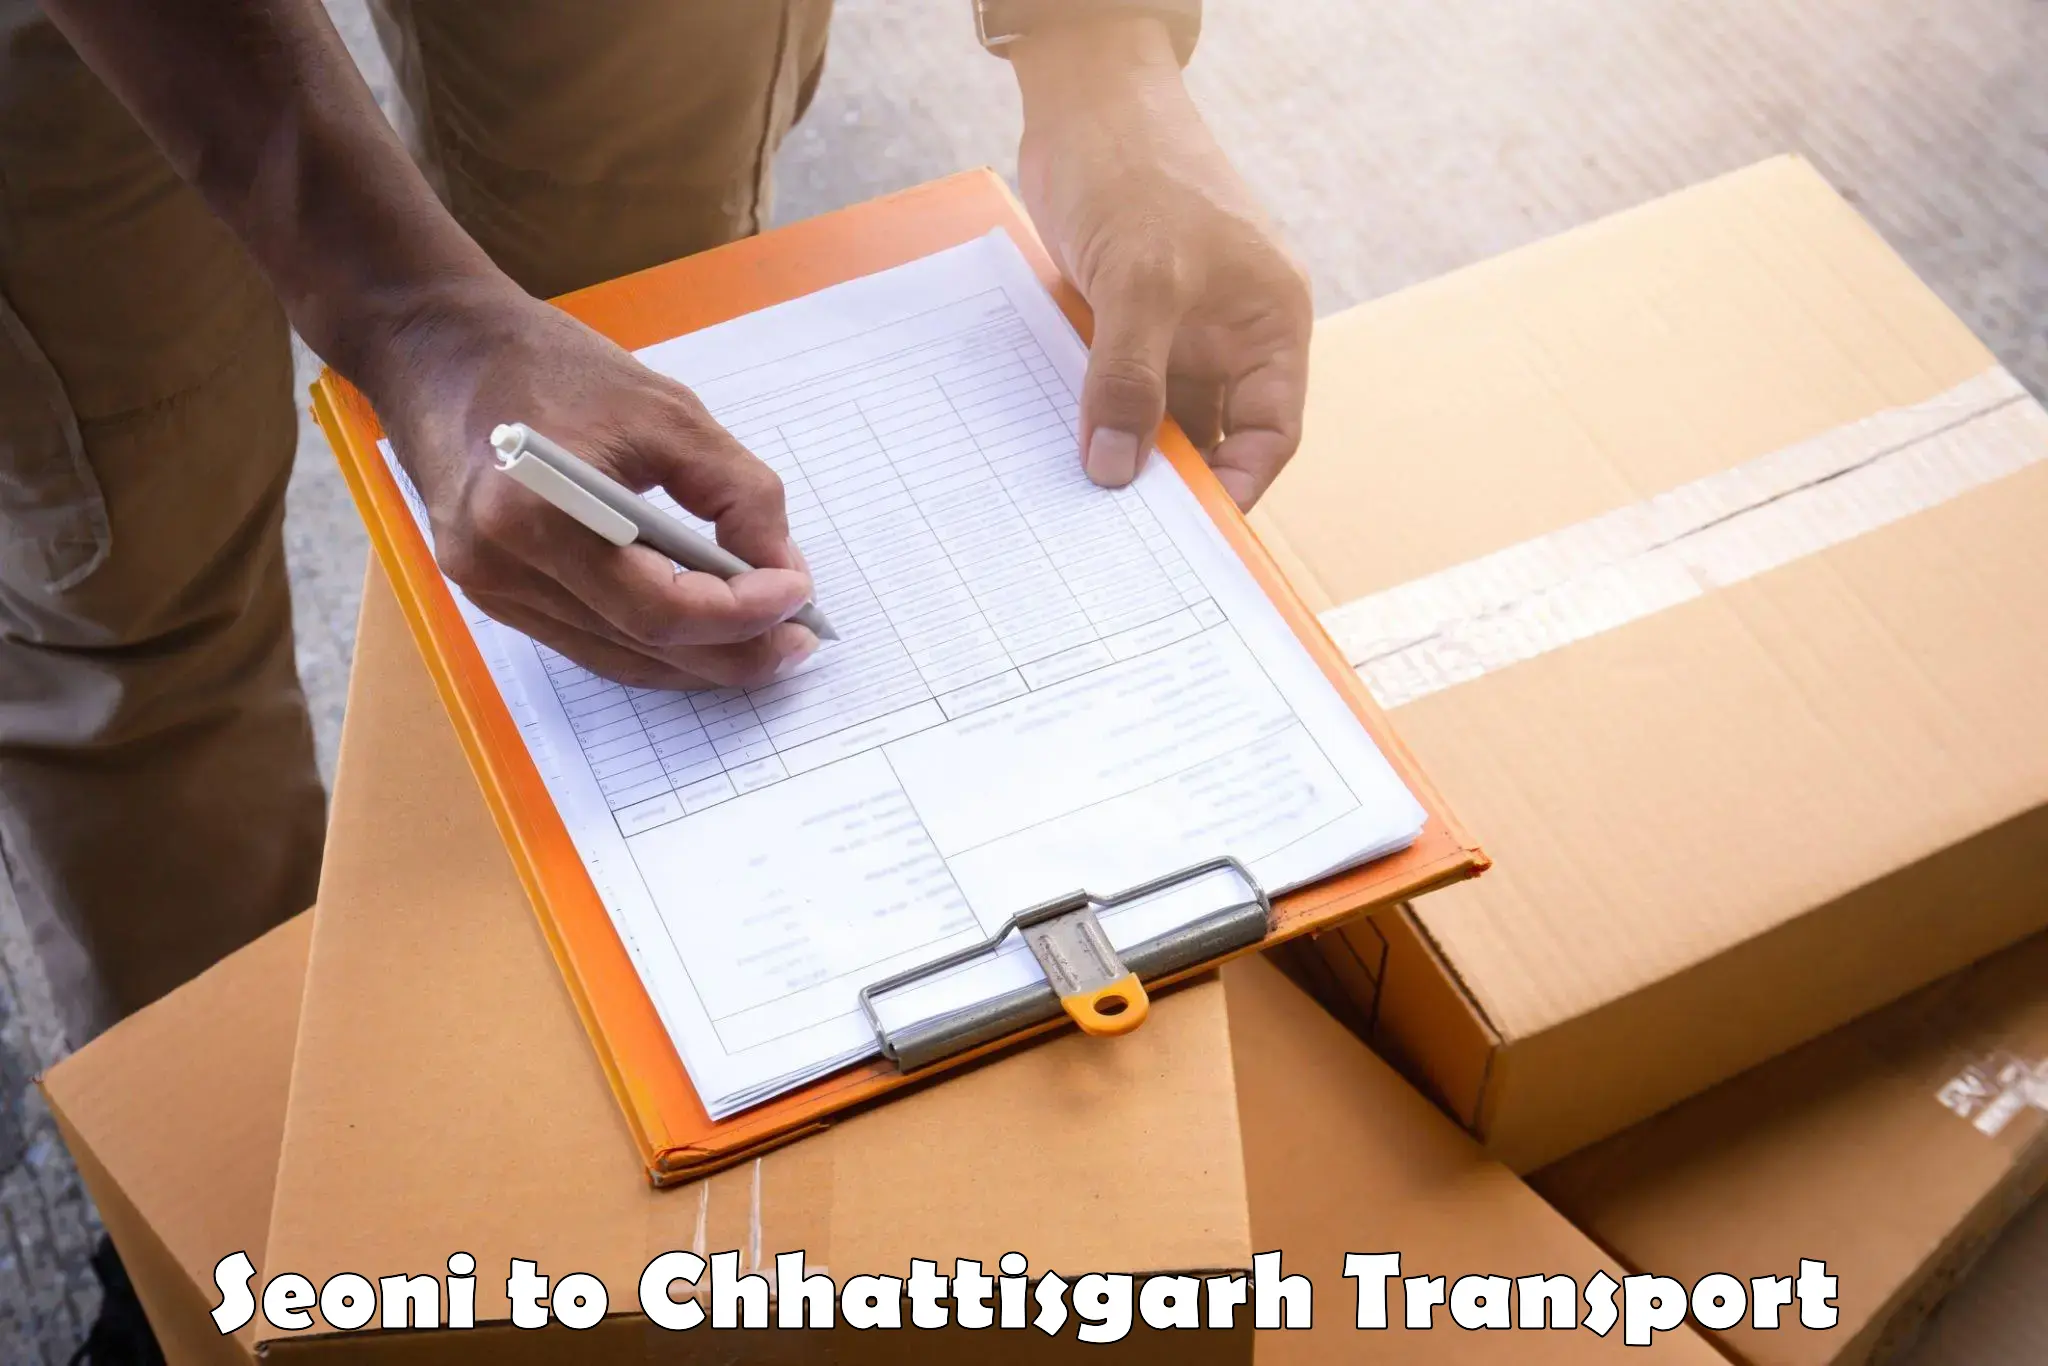 Container transport service Seoni to Dhamtari